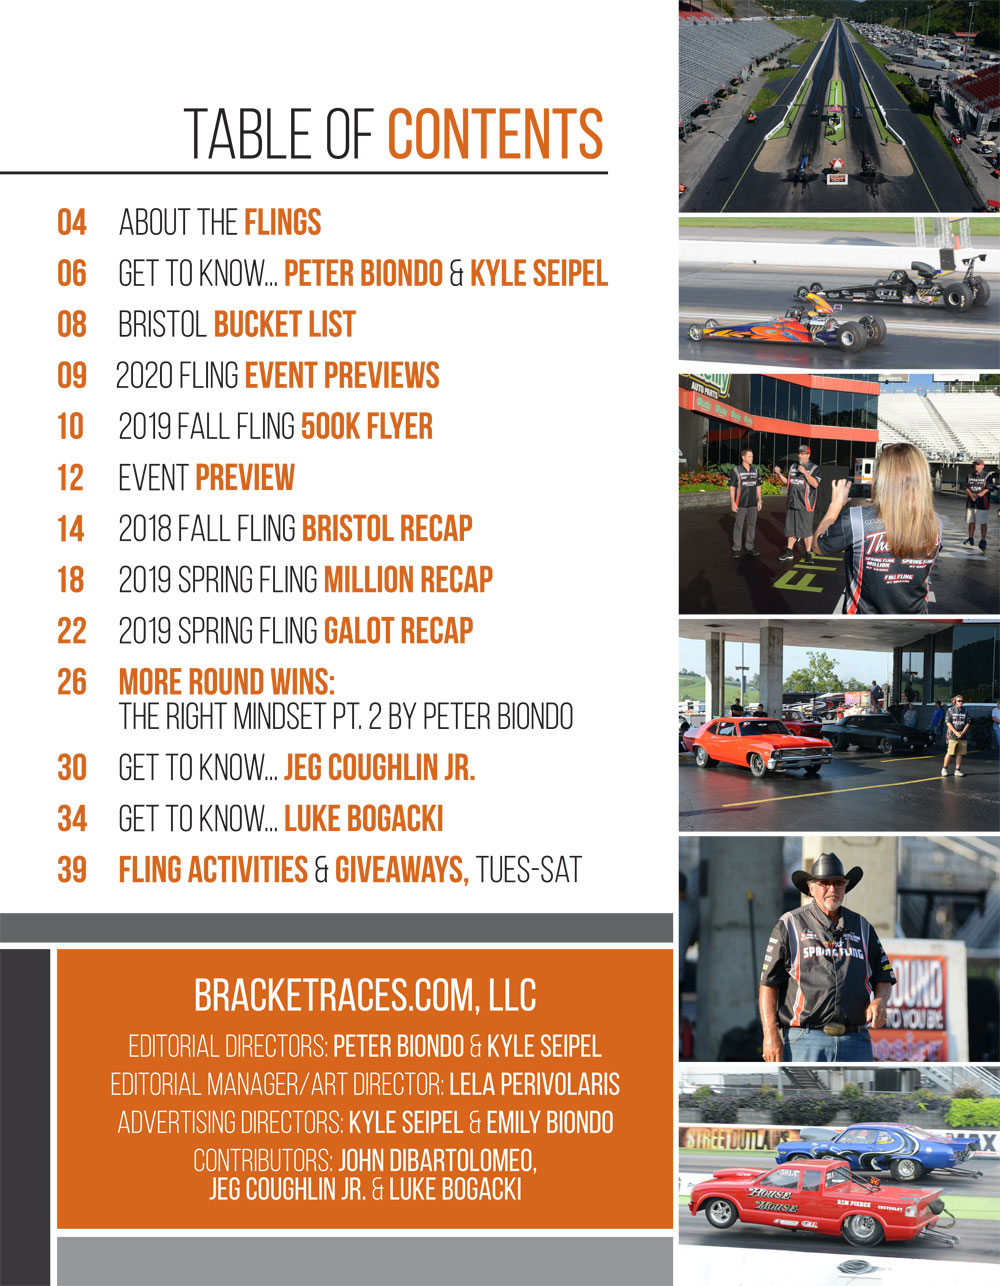 2019 Fall Fling Bristol Racer Guide page 3